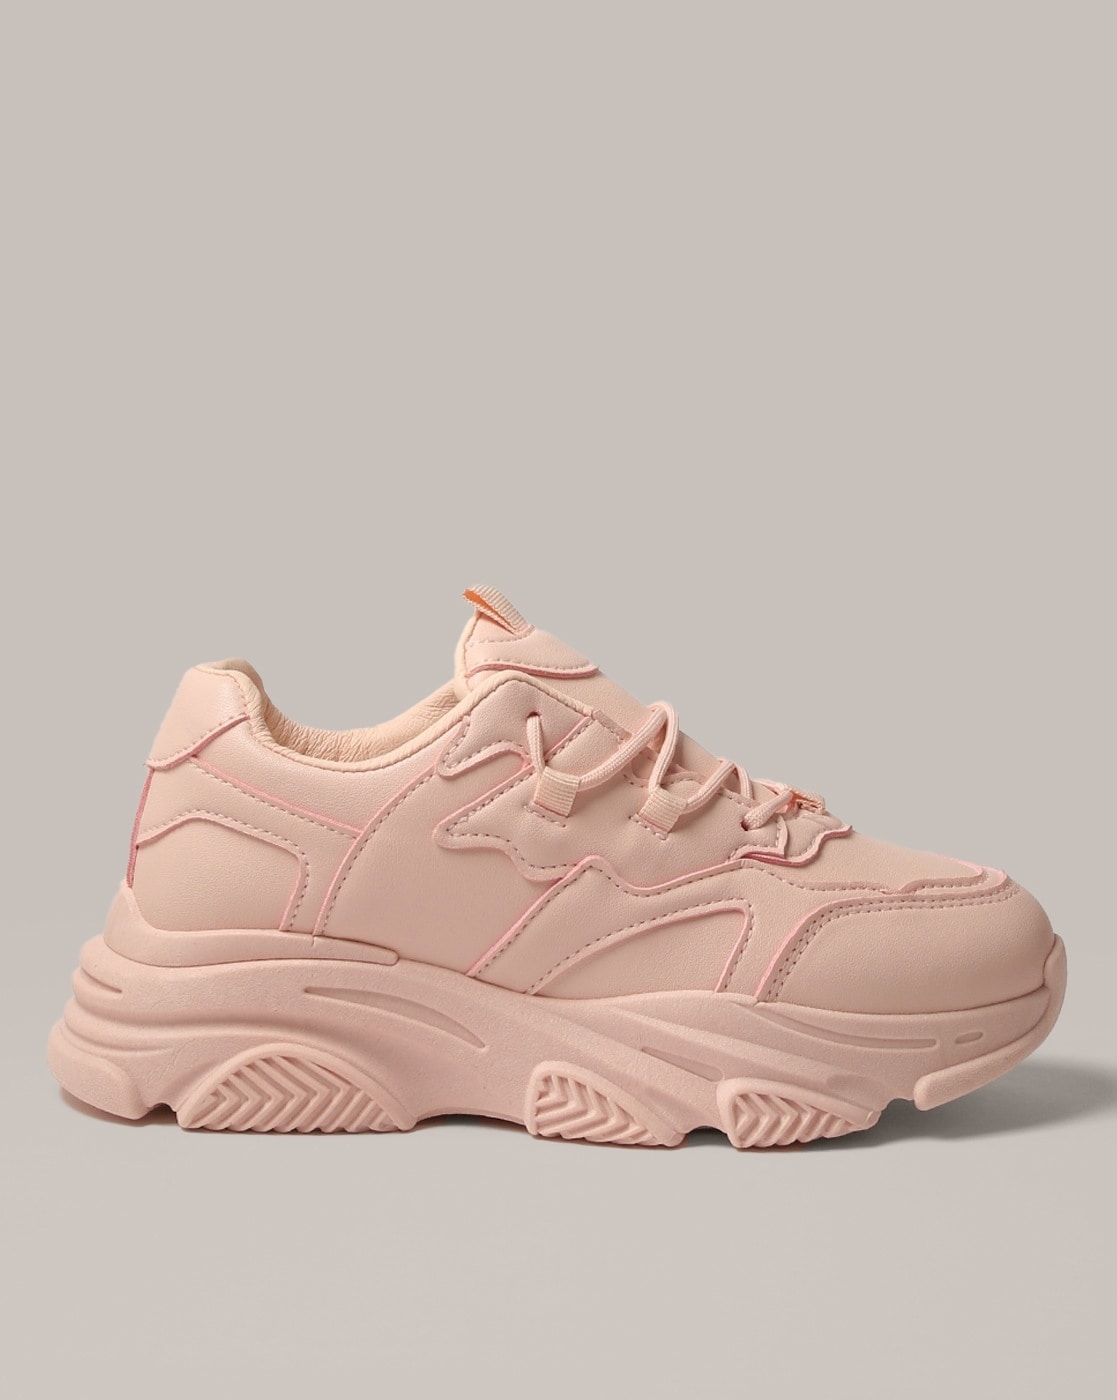 The Pink Sneakers Trend Is Spot-On For Spring - The Mom Edit